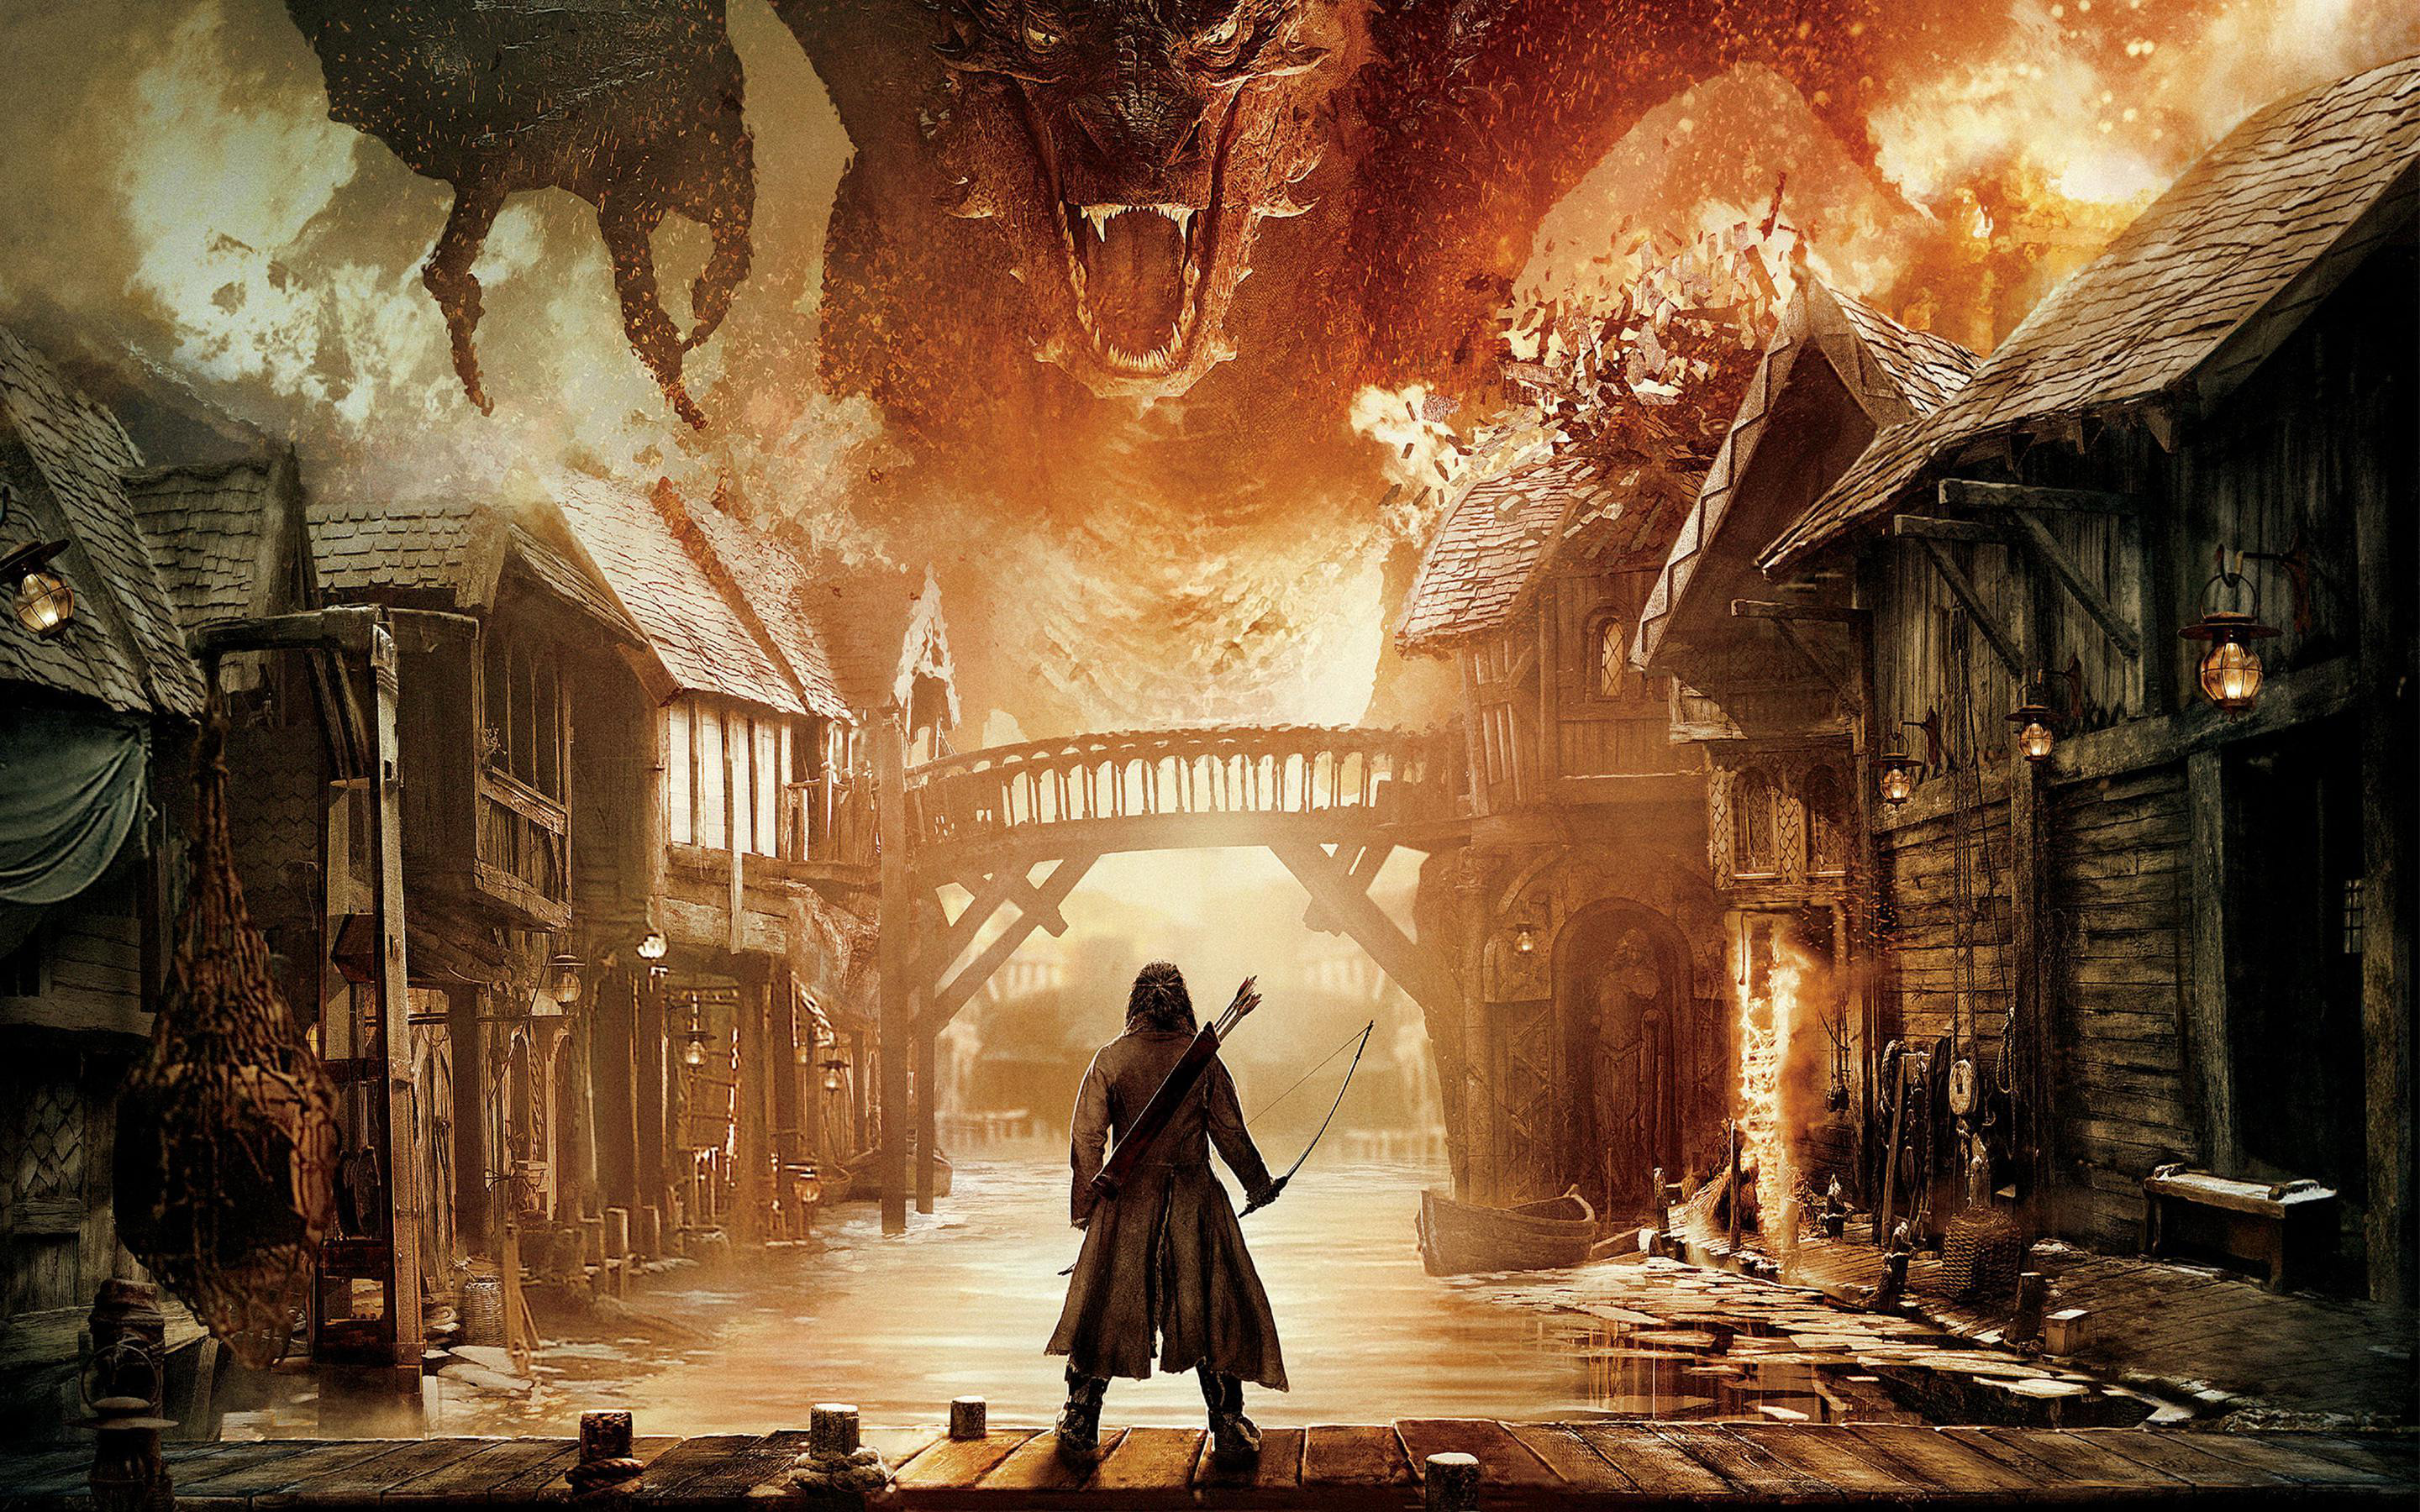 2880x1800 57 The Hobbit: The Battle of the Five Armies HD Wallpapers | Backgrounds -  Wallpaper Abyss